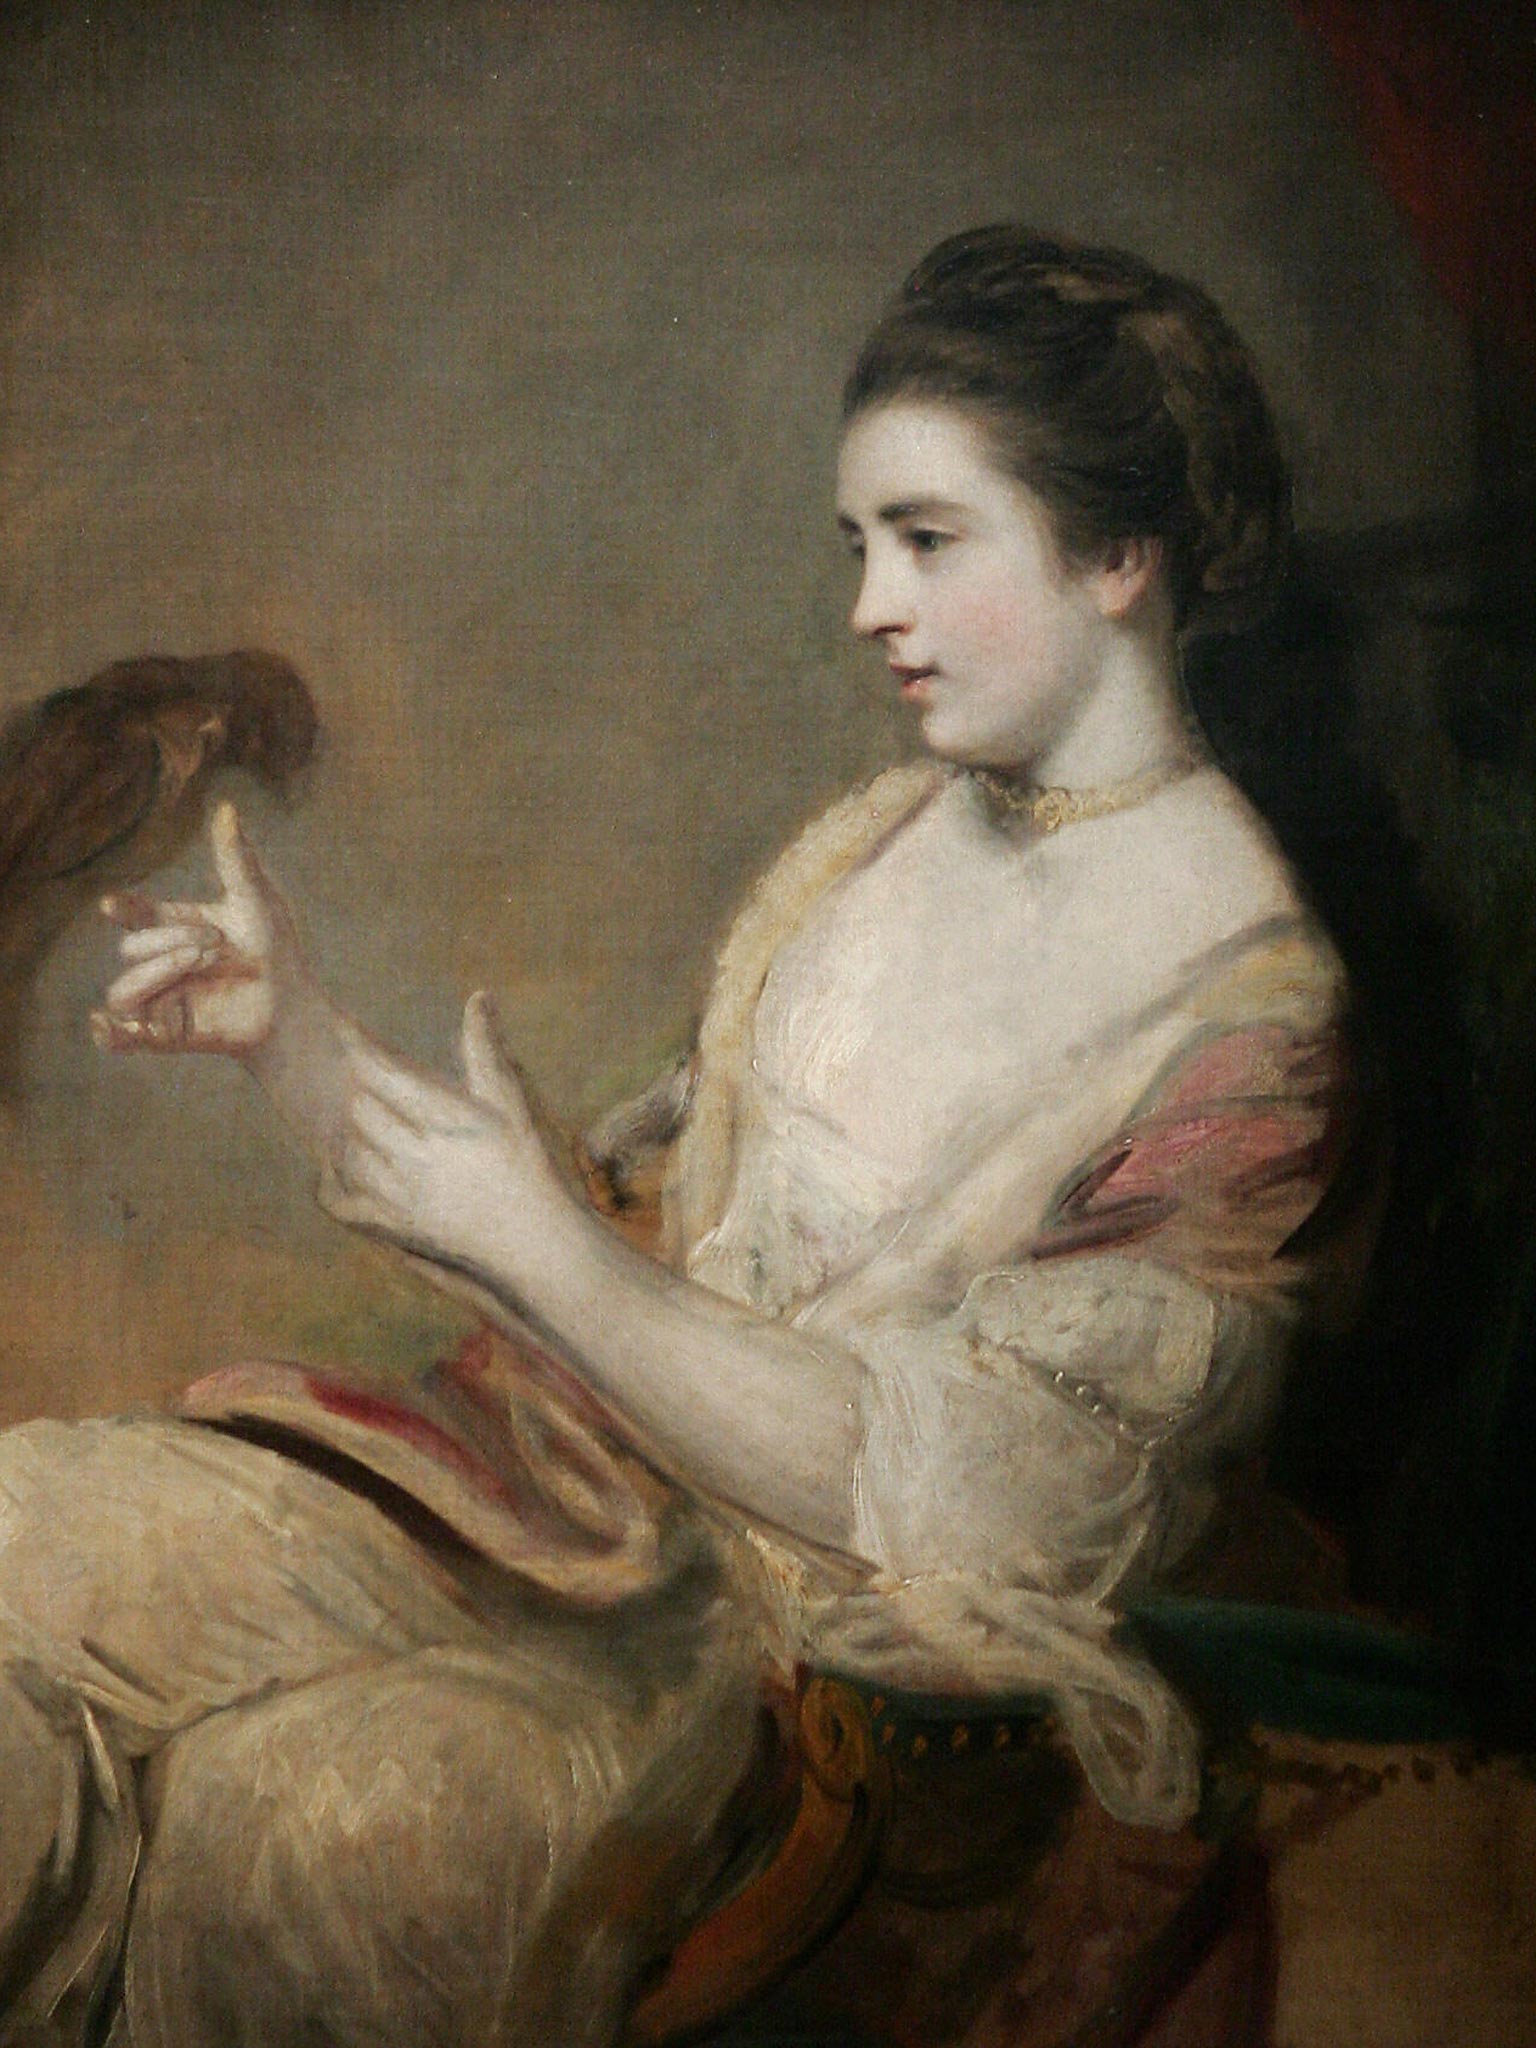 A portrait of Kitty Fisher by Sir Joshua Reynolds, he was experimenting with light and shade in his work